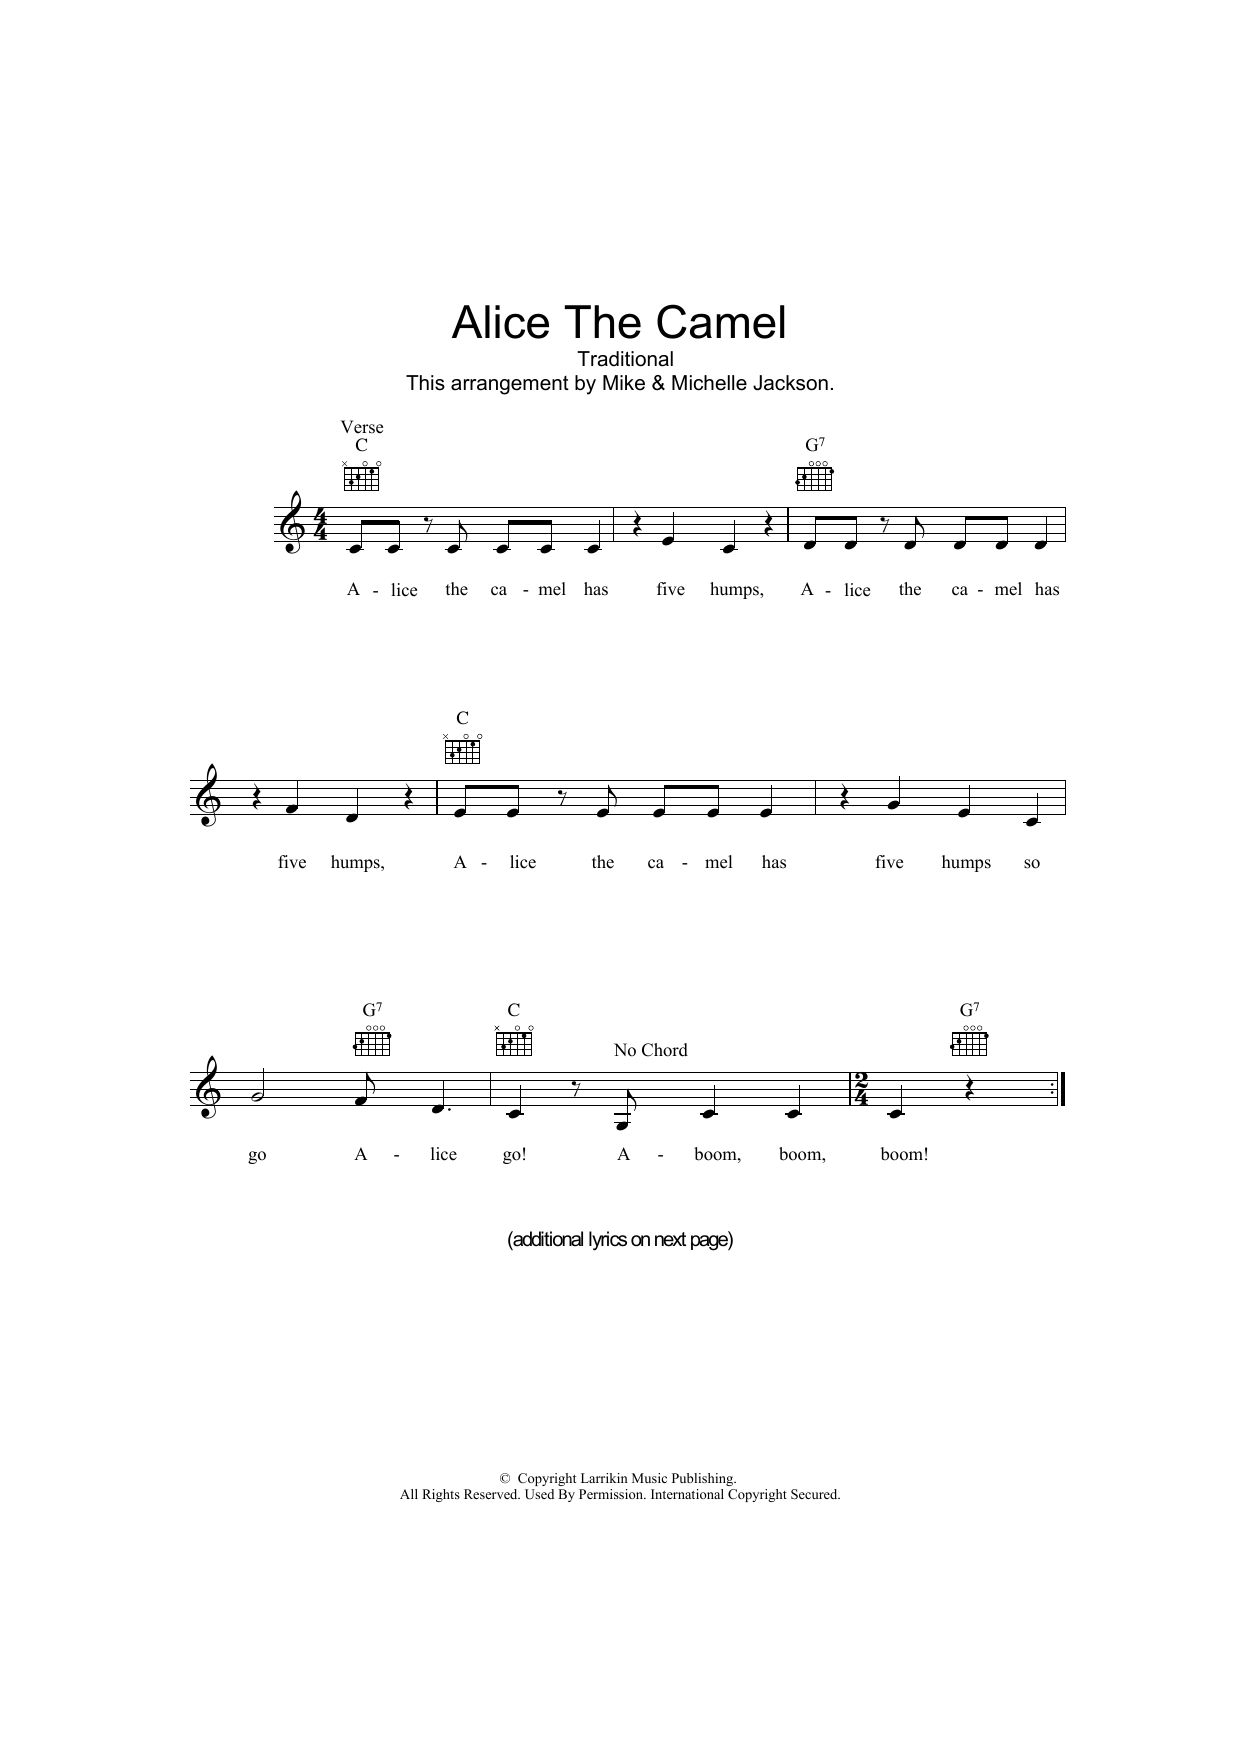 Download Traditional Alice The Camel Sheet Music